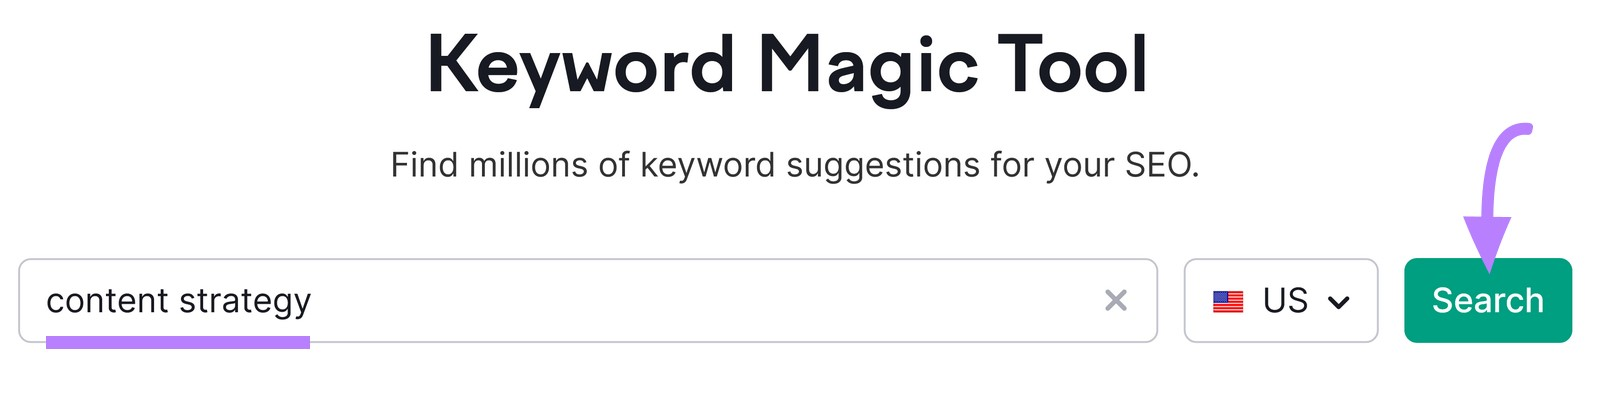 "content strategy" keyword entered in Keyword Magic Tool’s search bar